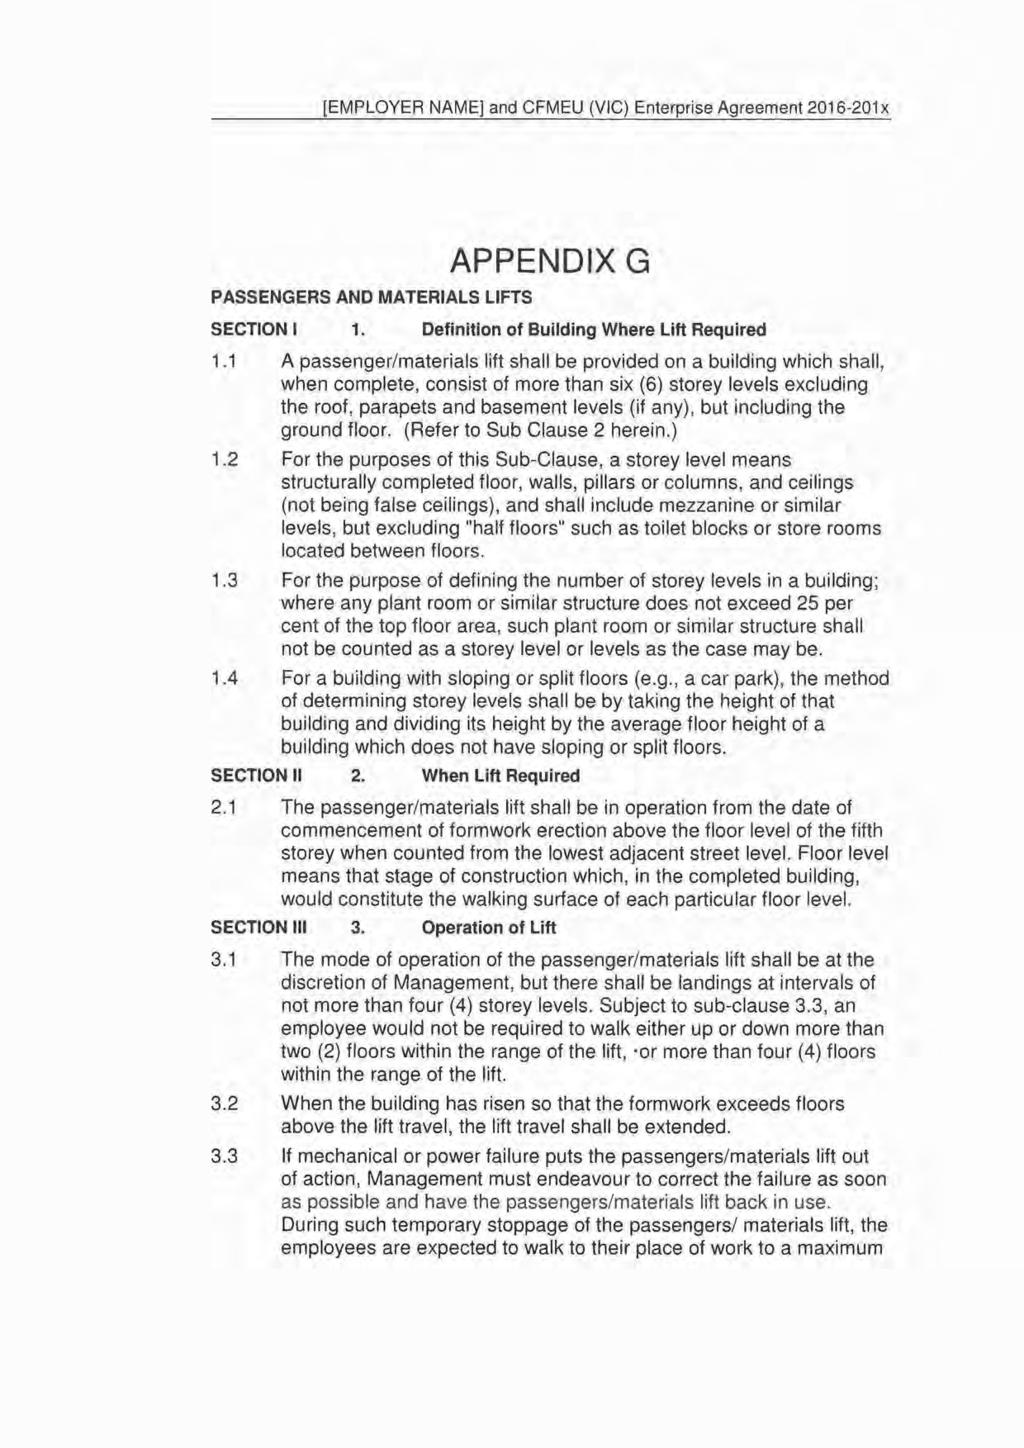 [EMPLOYER NAME] and CFMEU (VIC) Enterprise Agreement 2016-201 x PASSENGERS AND MATERIALS LIFTS APPENDIX G SECTION I 1. Definition of Building Where Lift Required 1.